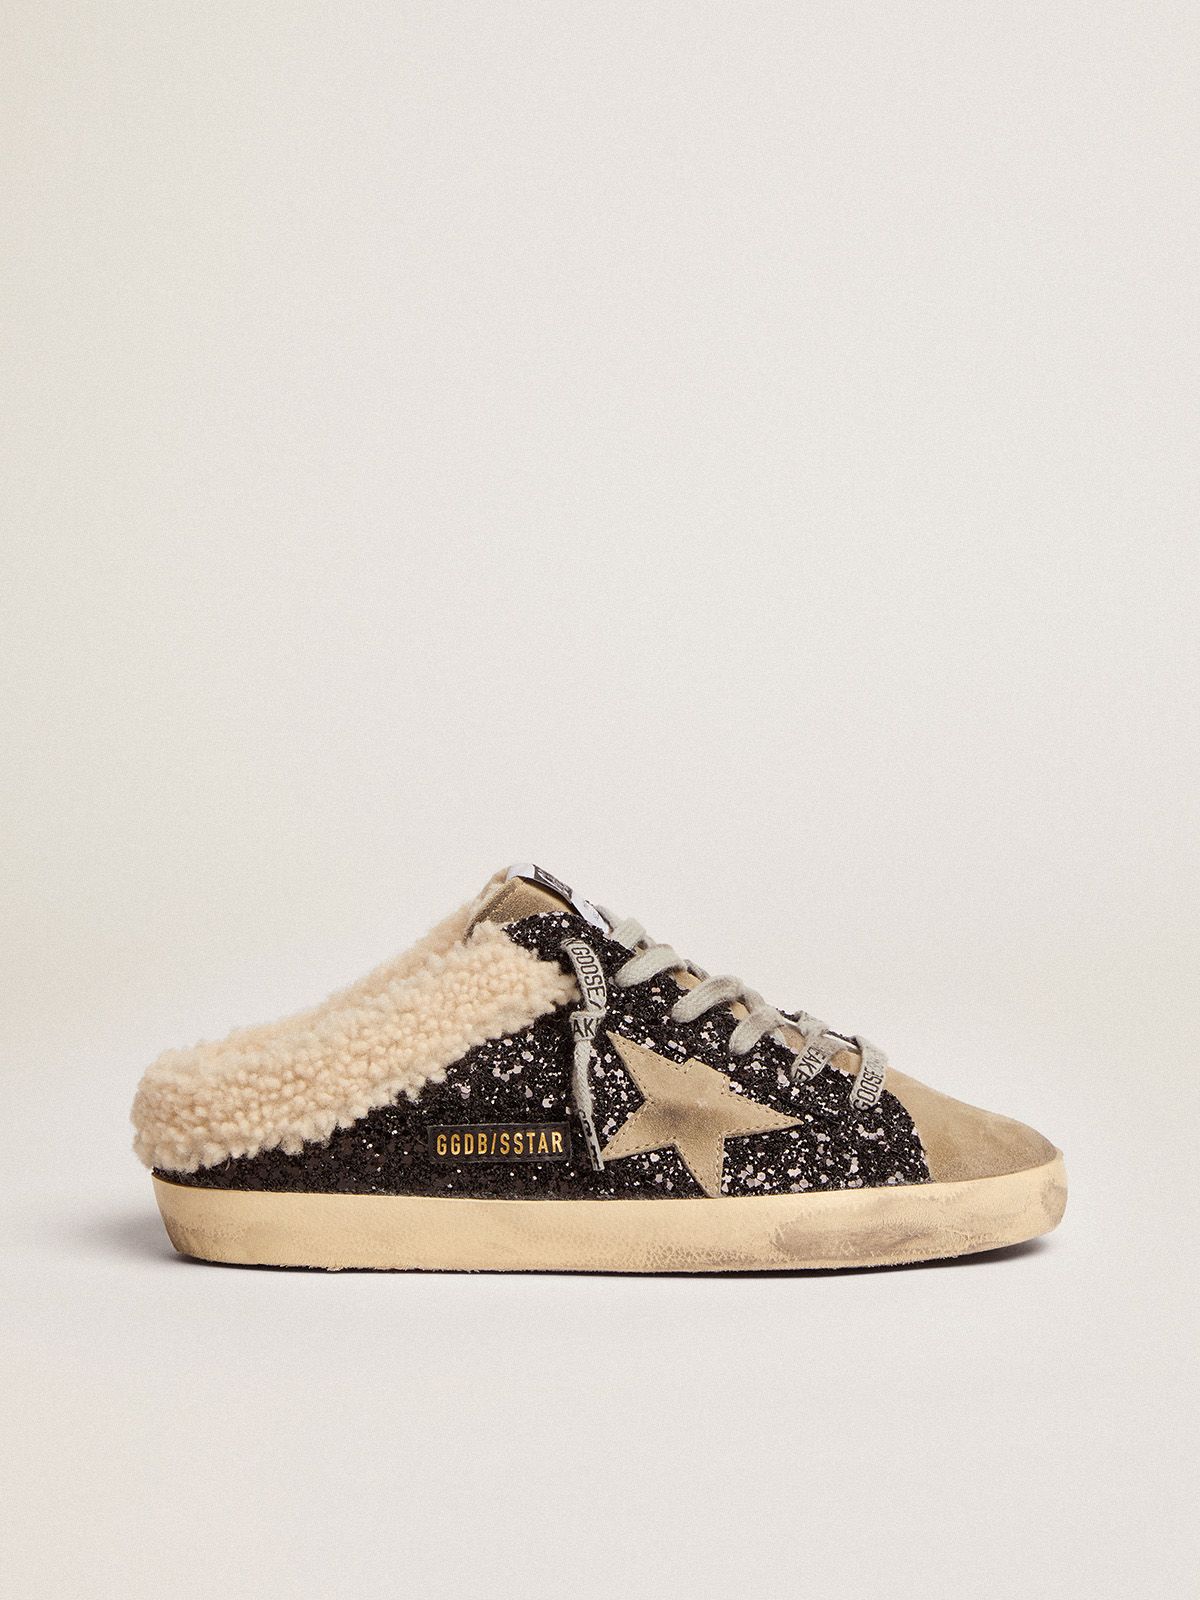 golden goose glitter black with shearling Sabots in dove-gray and lining suede Super-Star LTD star